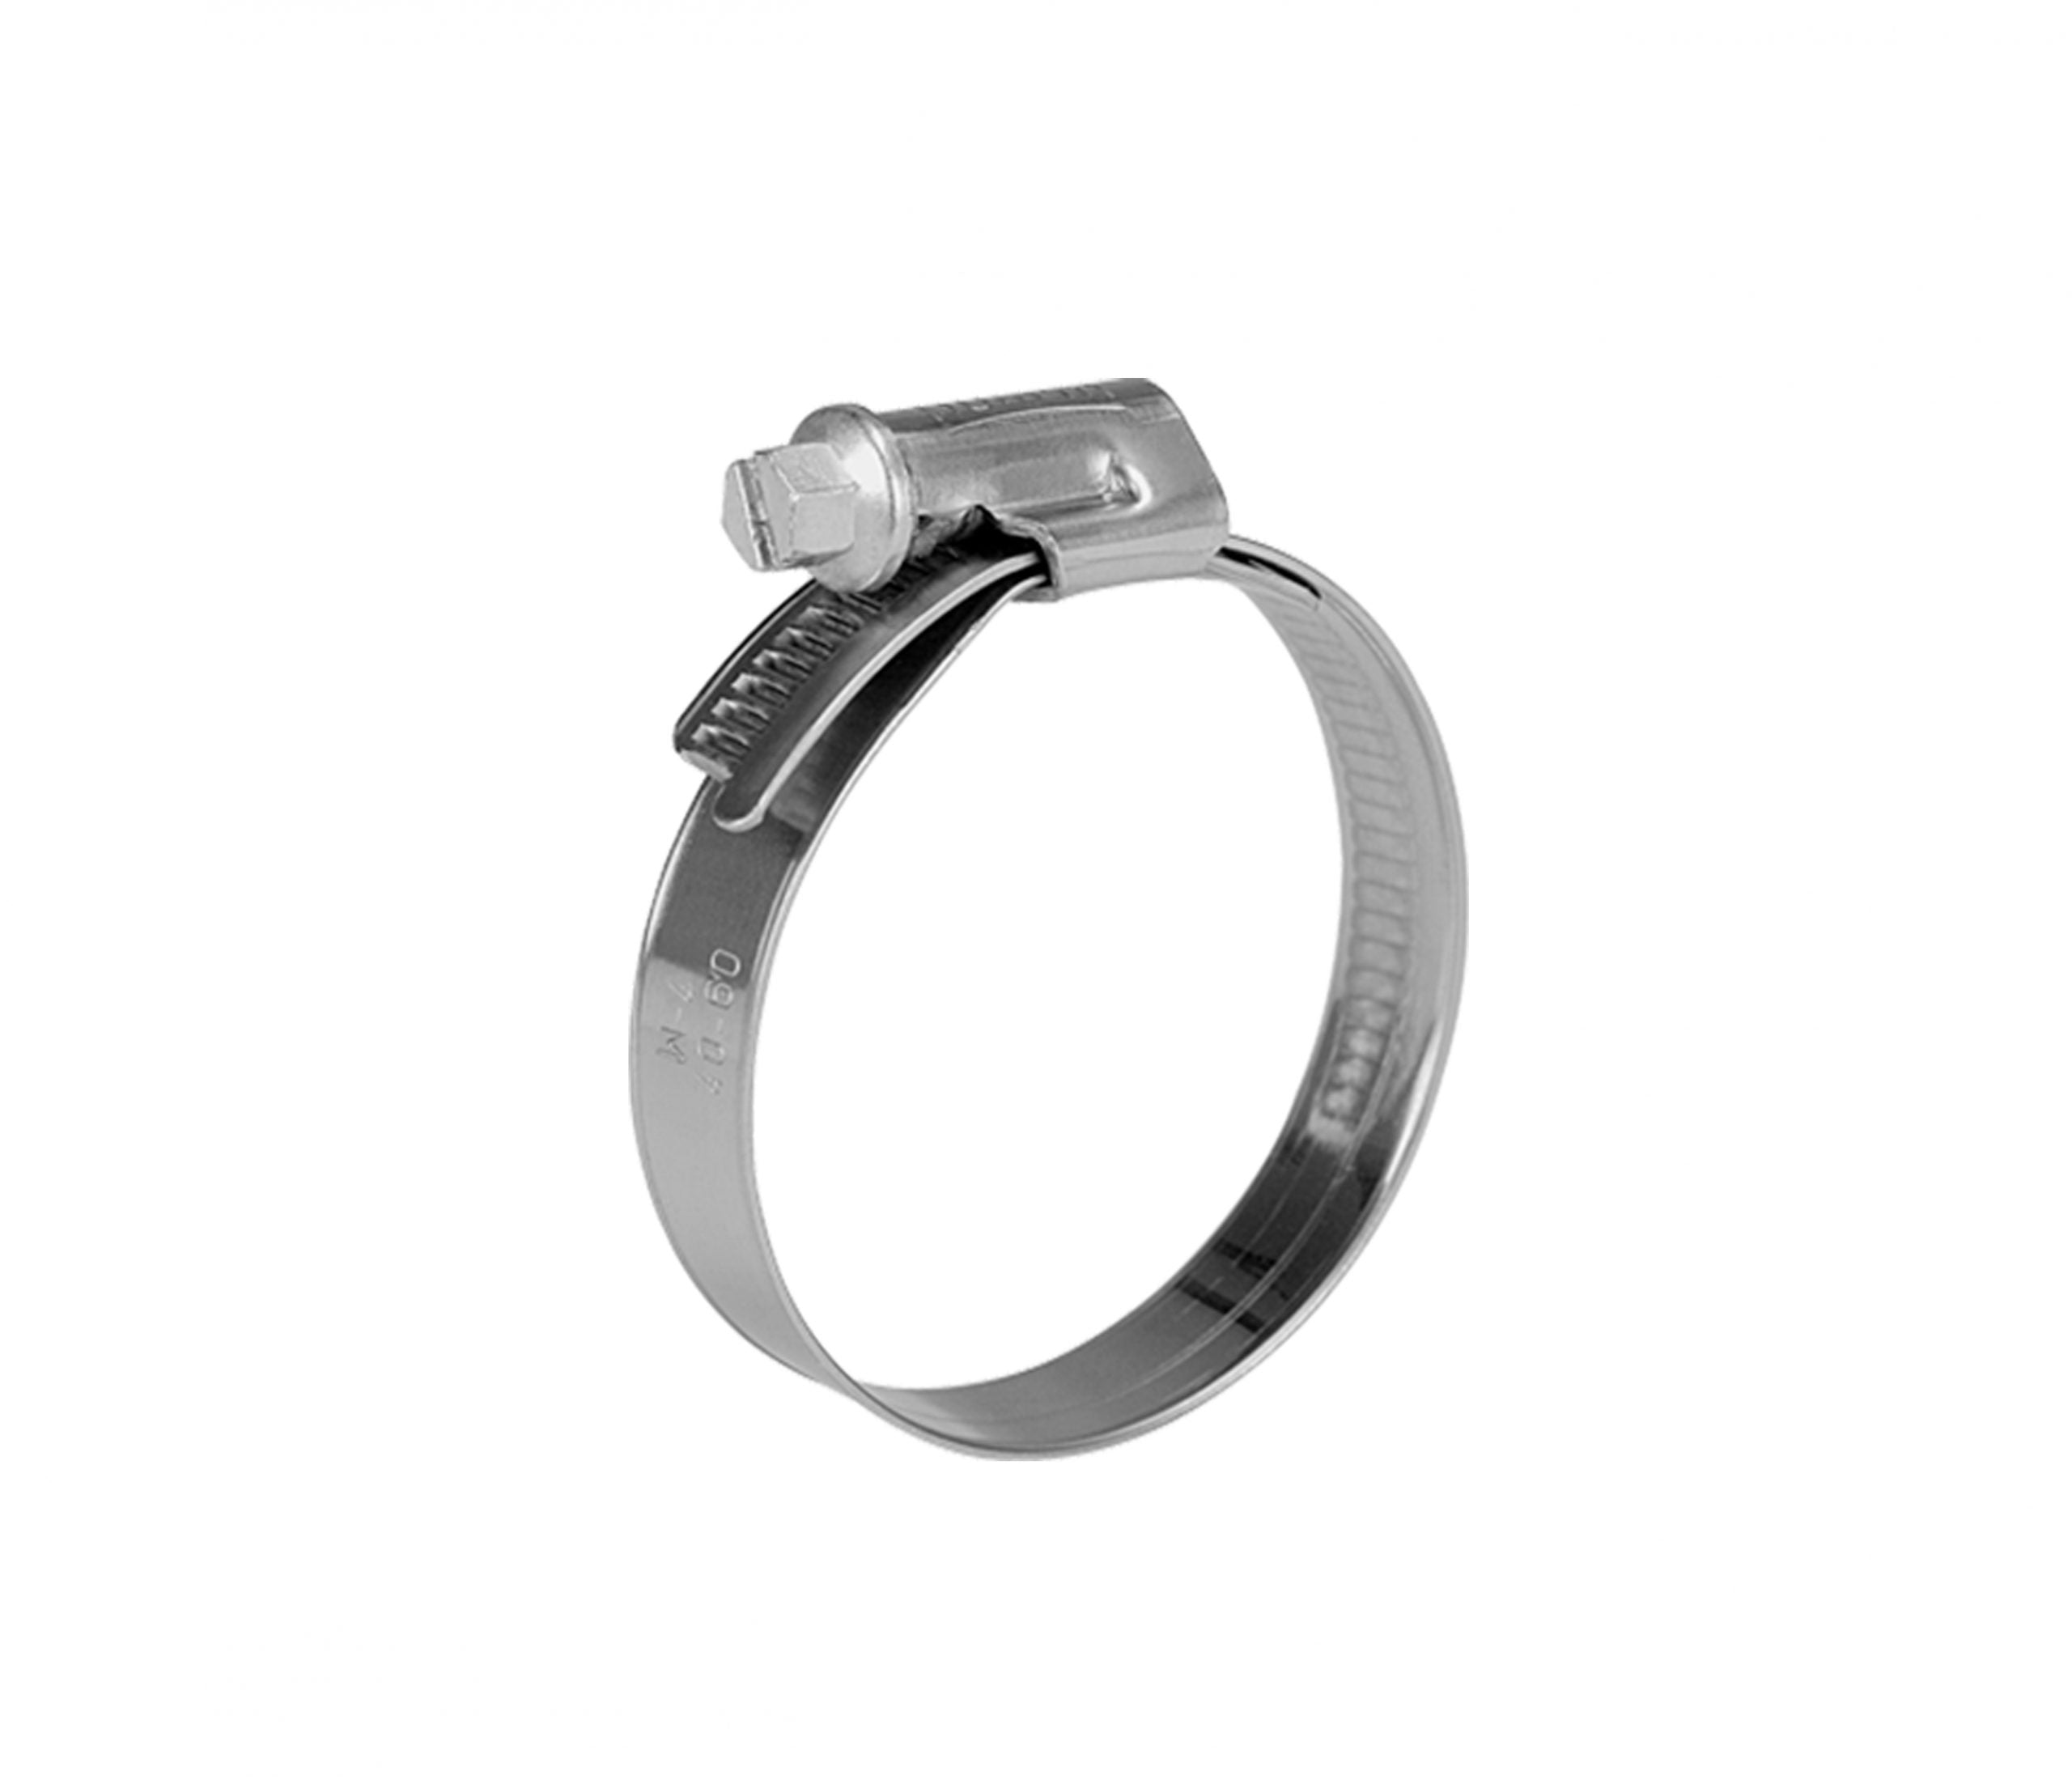 25-40mm Stainless Steel Hose Clamp with Worm Drive 722-2540 by Norma